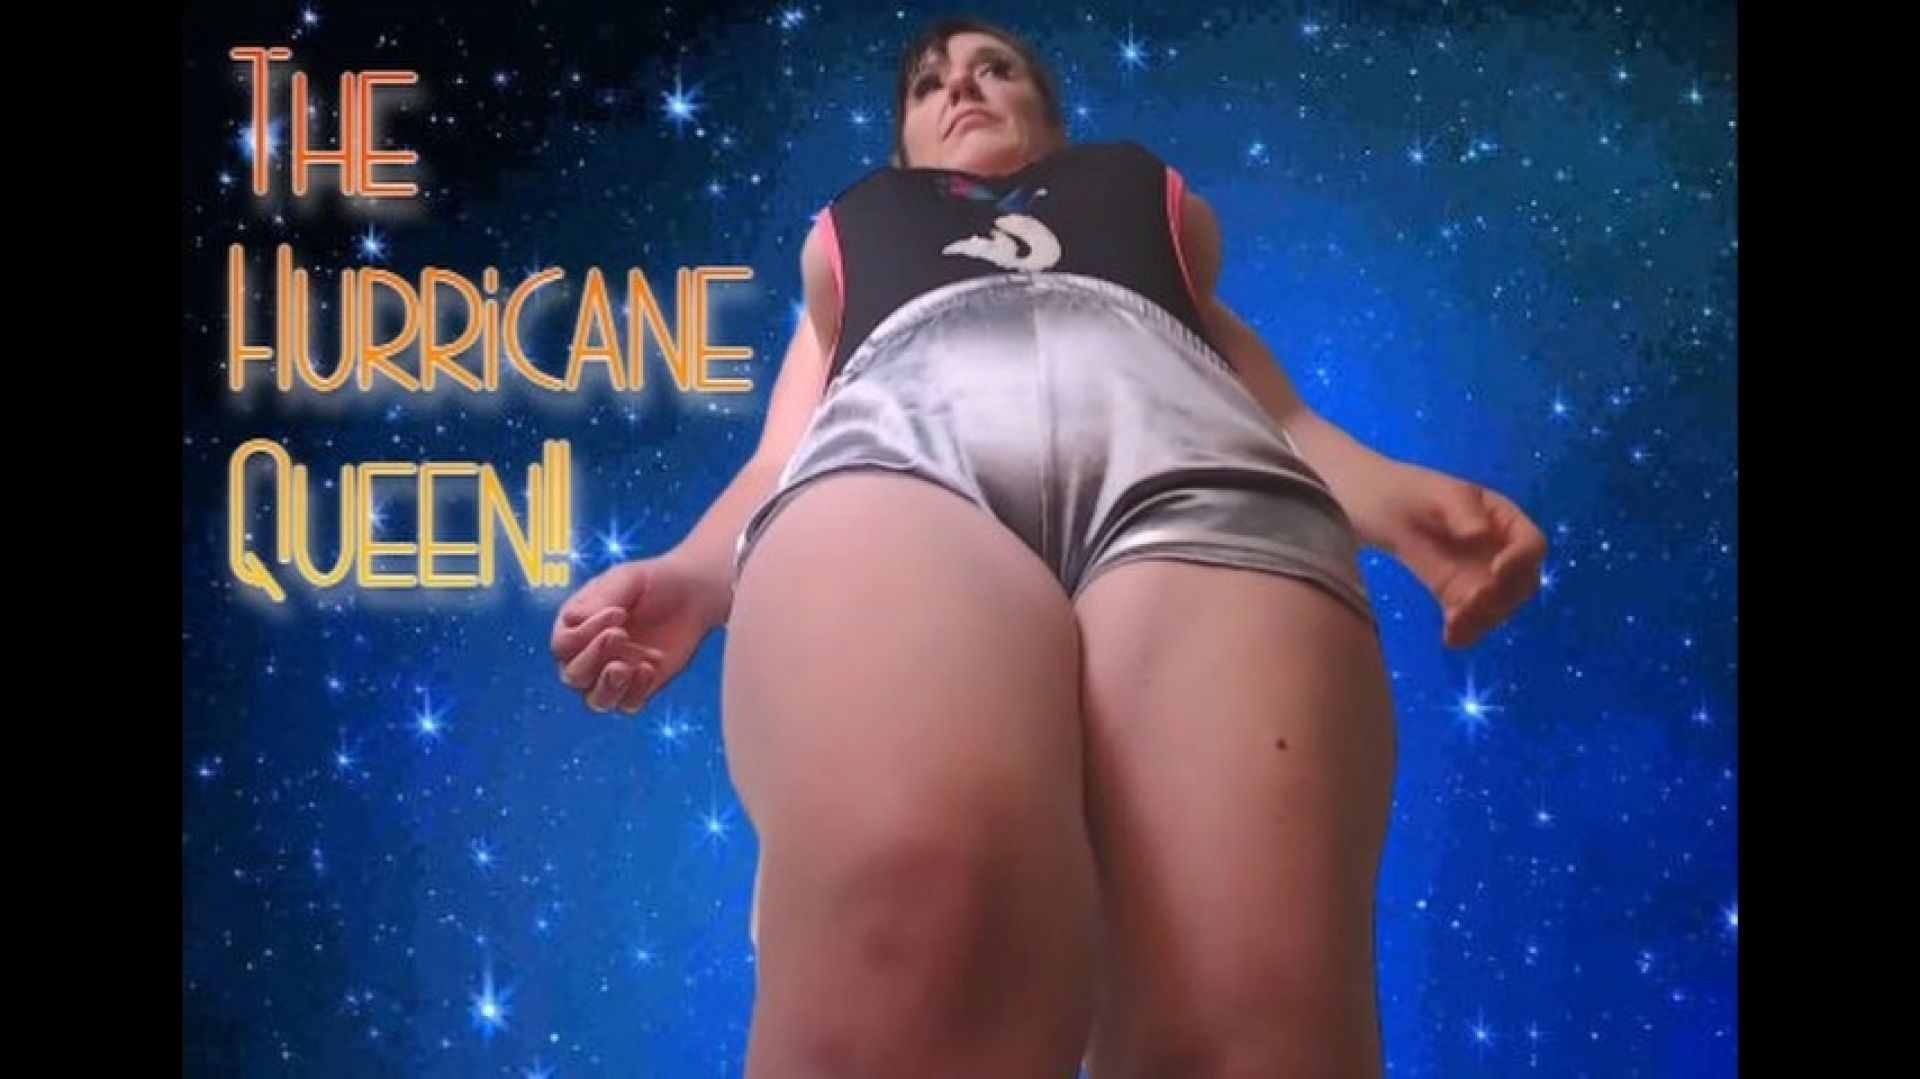 leaked The Hurricane Queen thumbnail